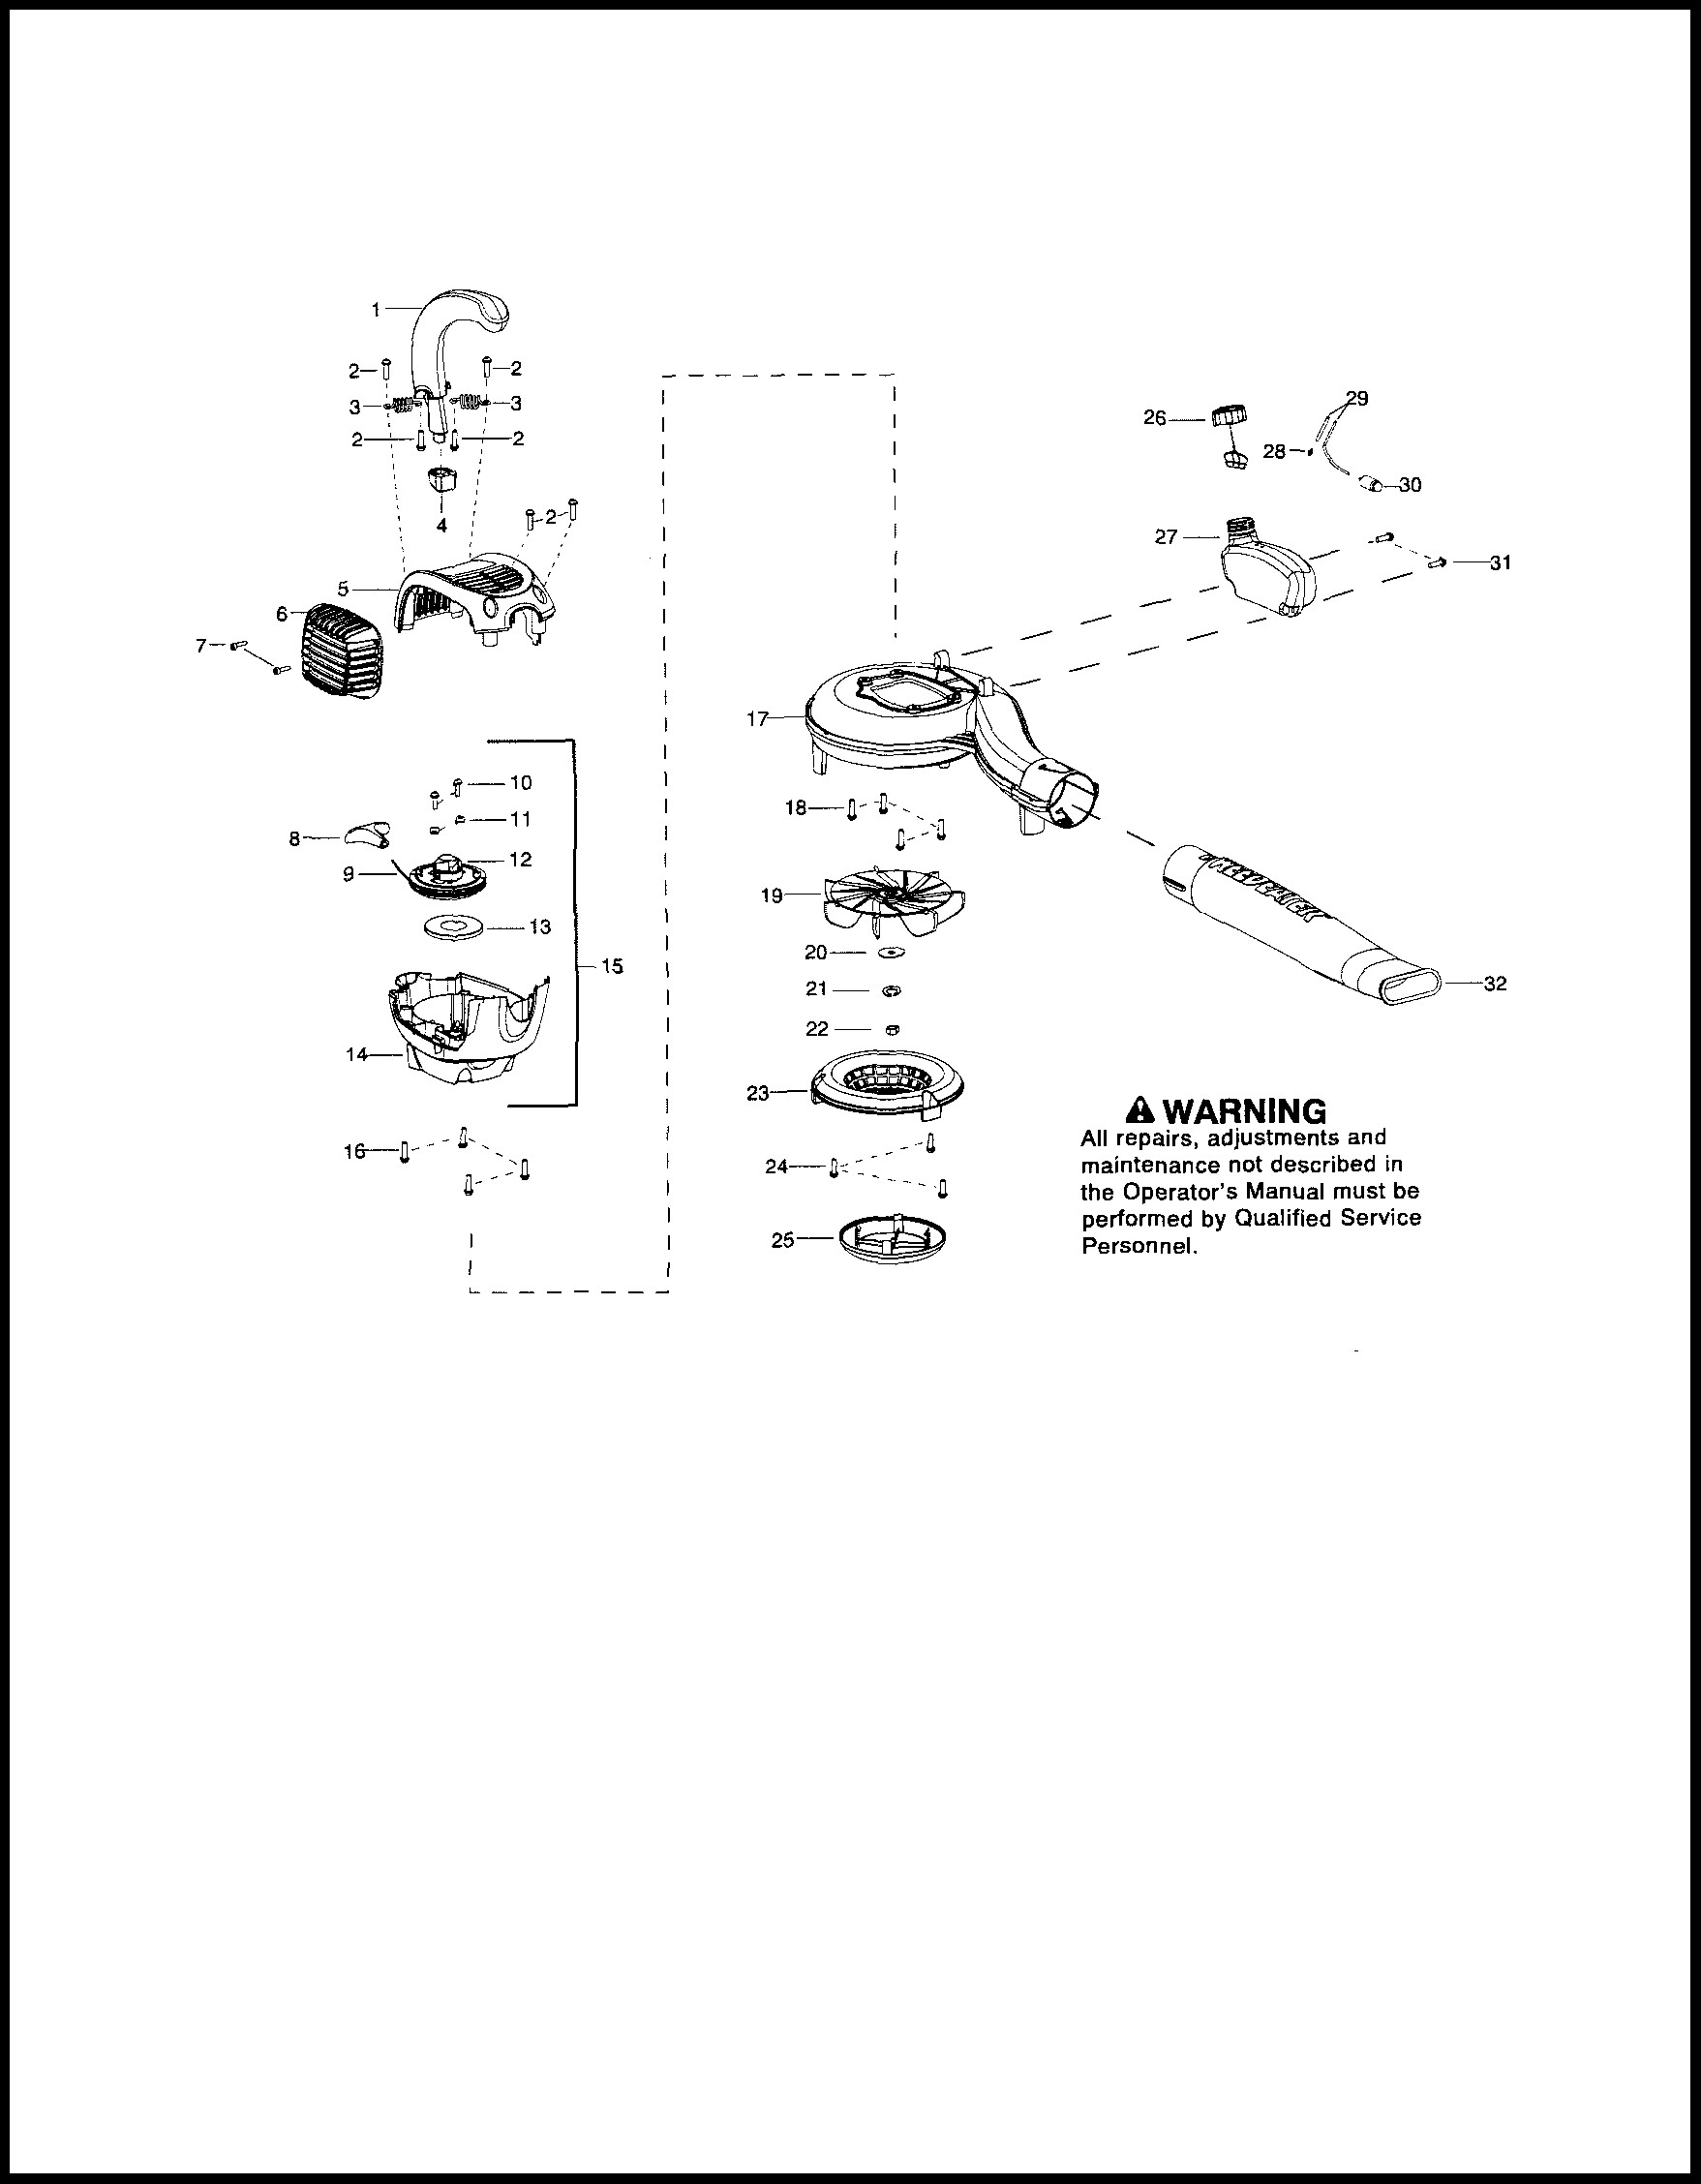 Weed Eater Fb25 Parts Diagram